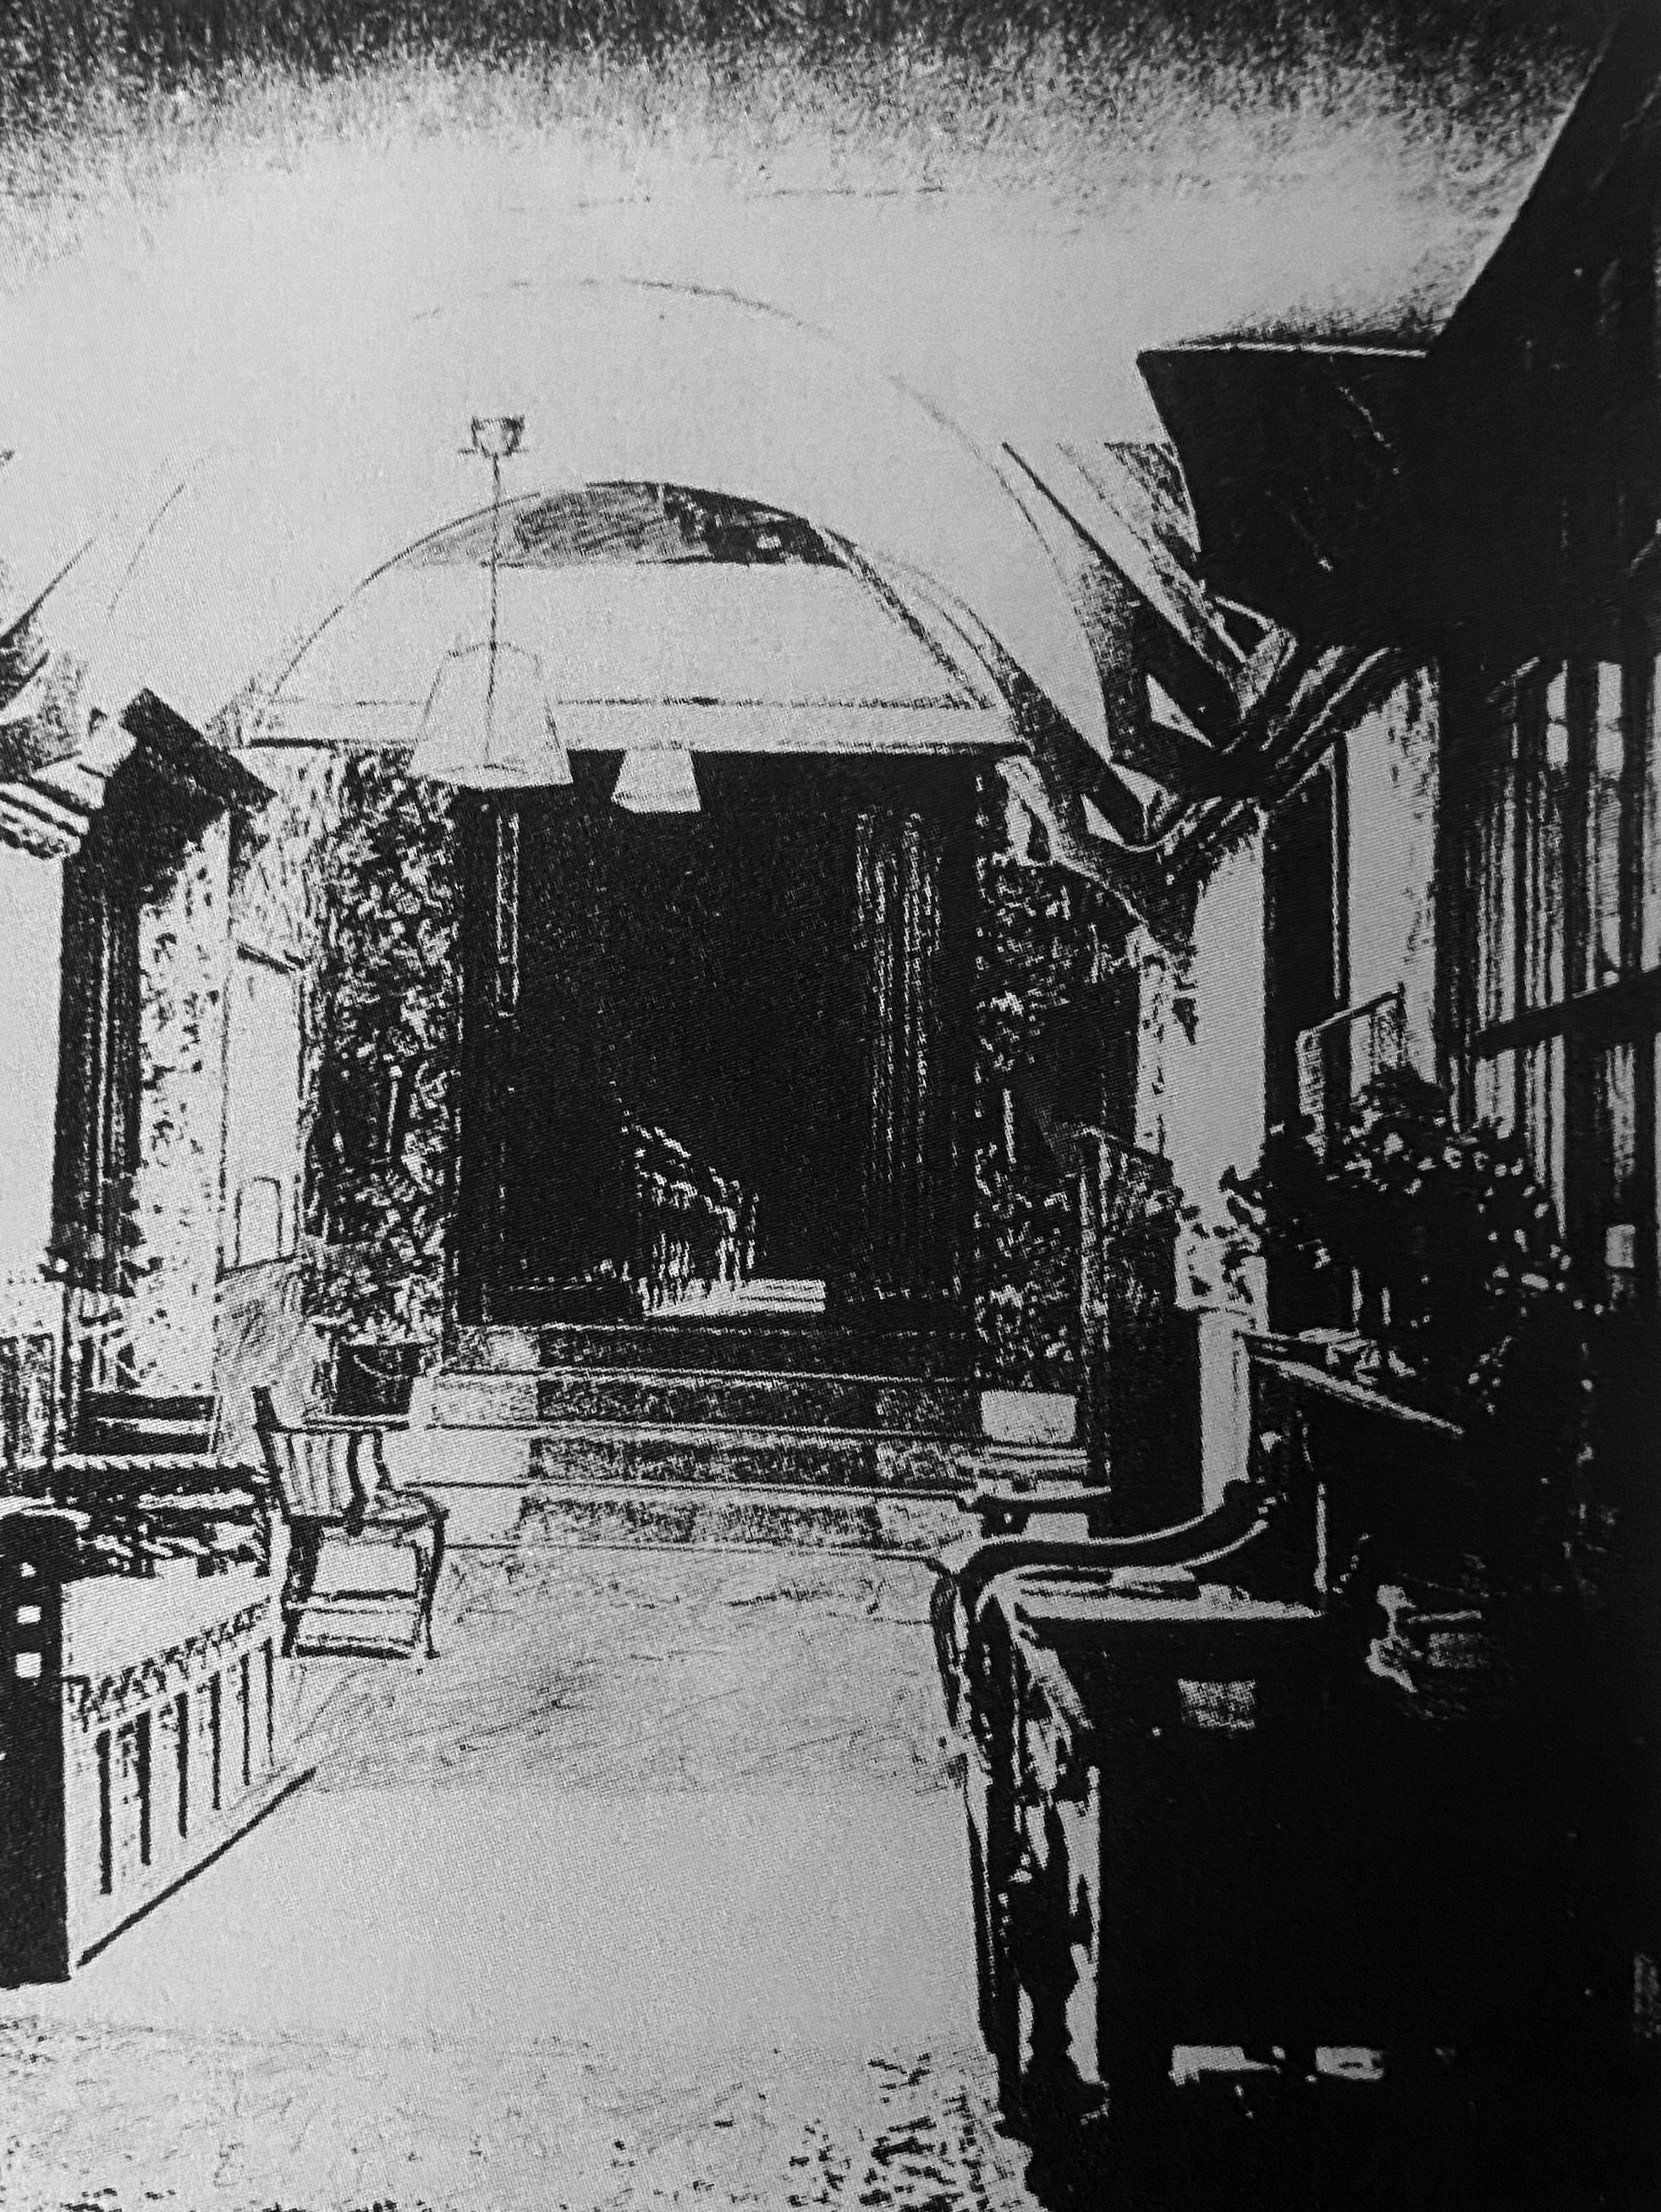 The hotel entrance hall, with the cinema entrance at the back, in around 1934. The ticket office can be seen on the left and the public entrance to the cinema was through the doors to the right, rather than through the hotel lobby.